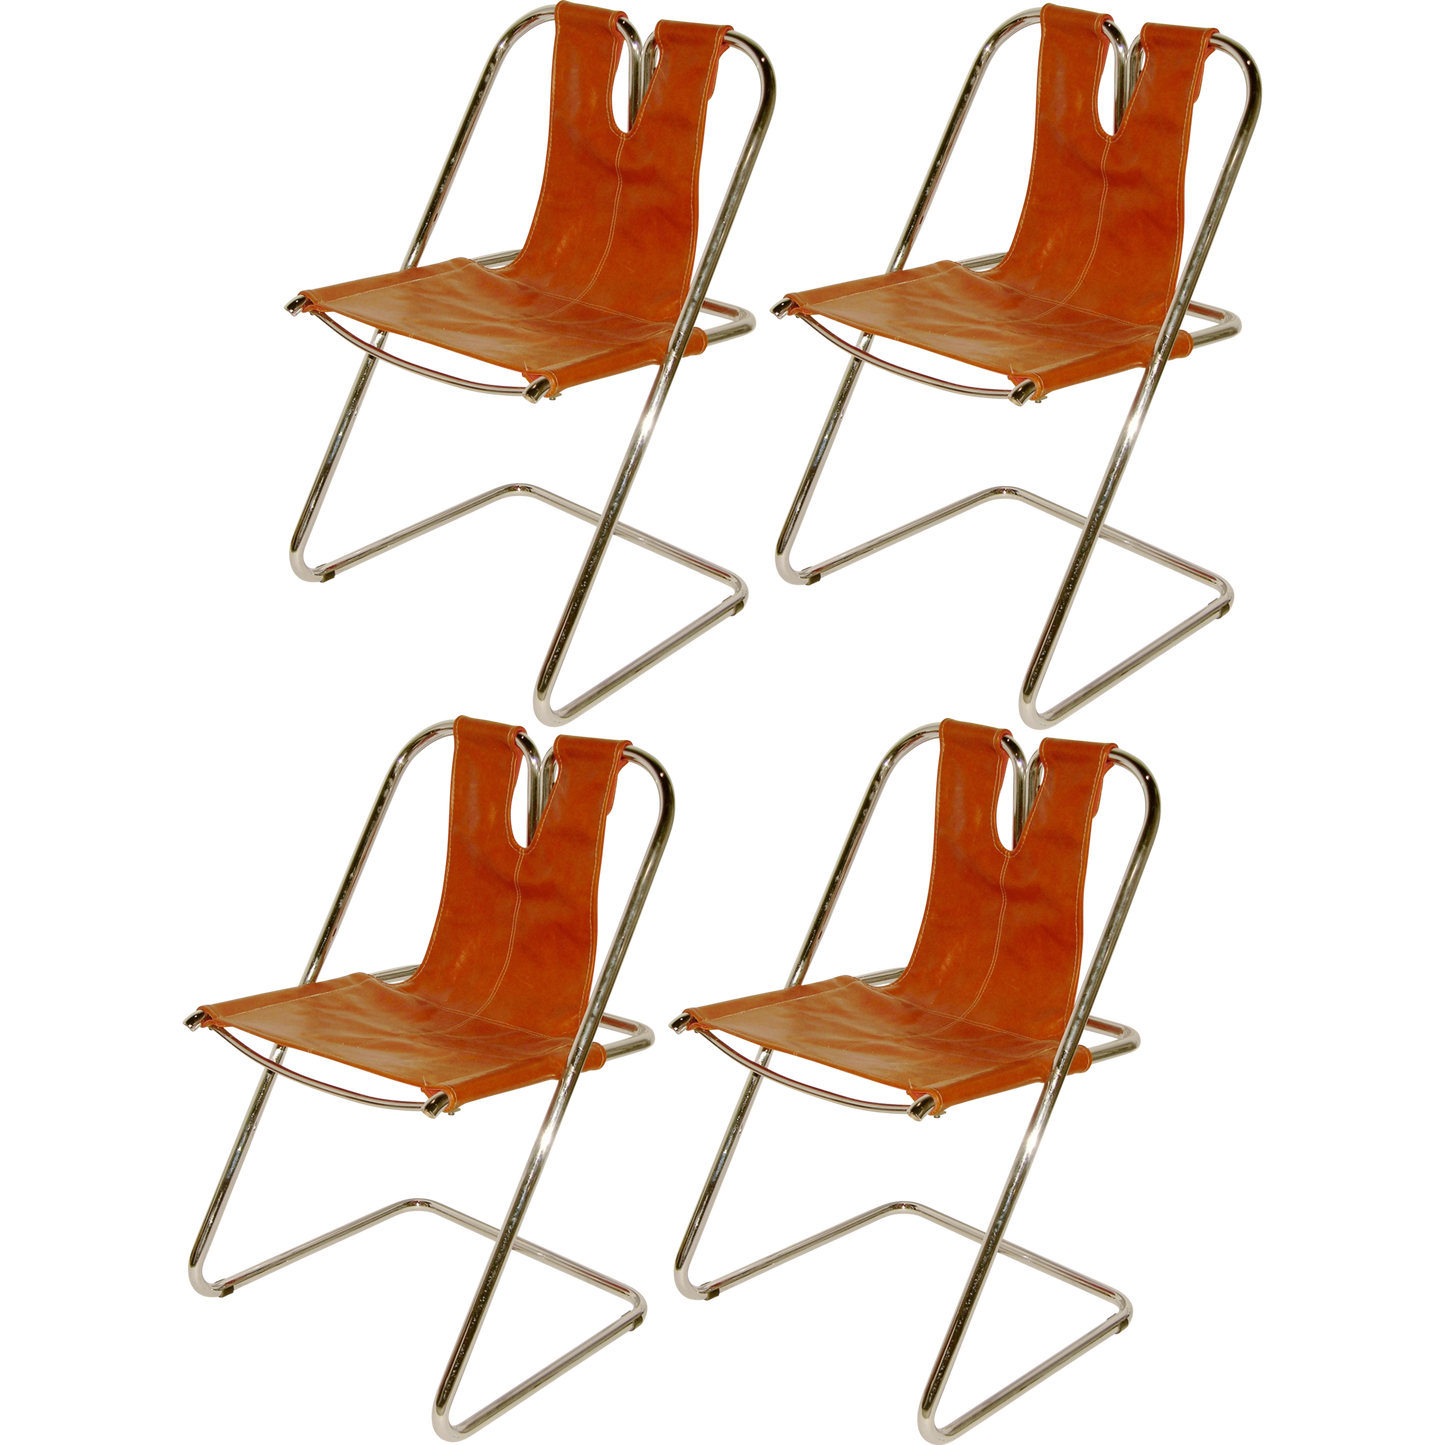 1960s Italian Set of Four Hand-Stitched Leather and Chrome Chairs - Cosulich Interiors & Antiques